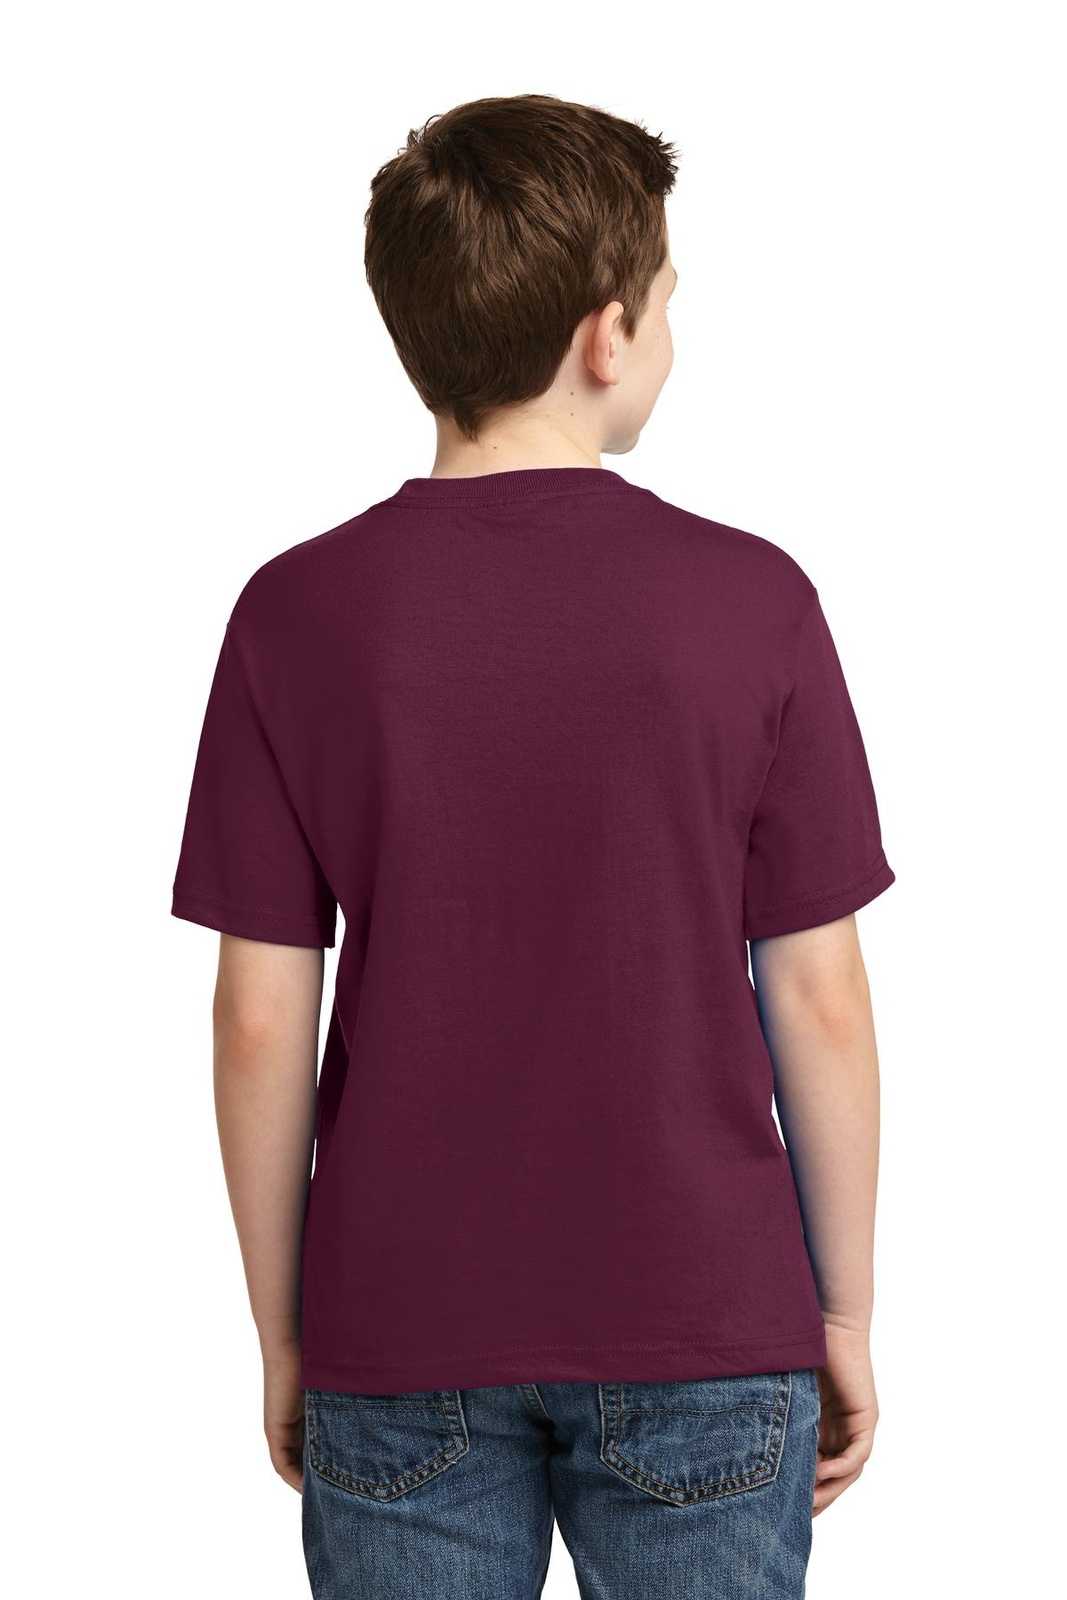 Jerzees 29B Youth Dri-Power 50/50 Cotton/Poly T-Shirt - Maroon - HIT a Double